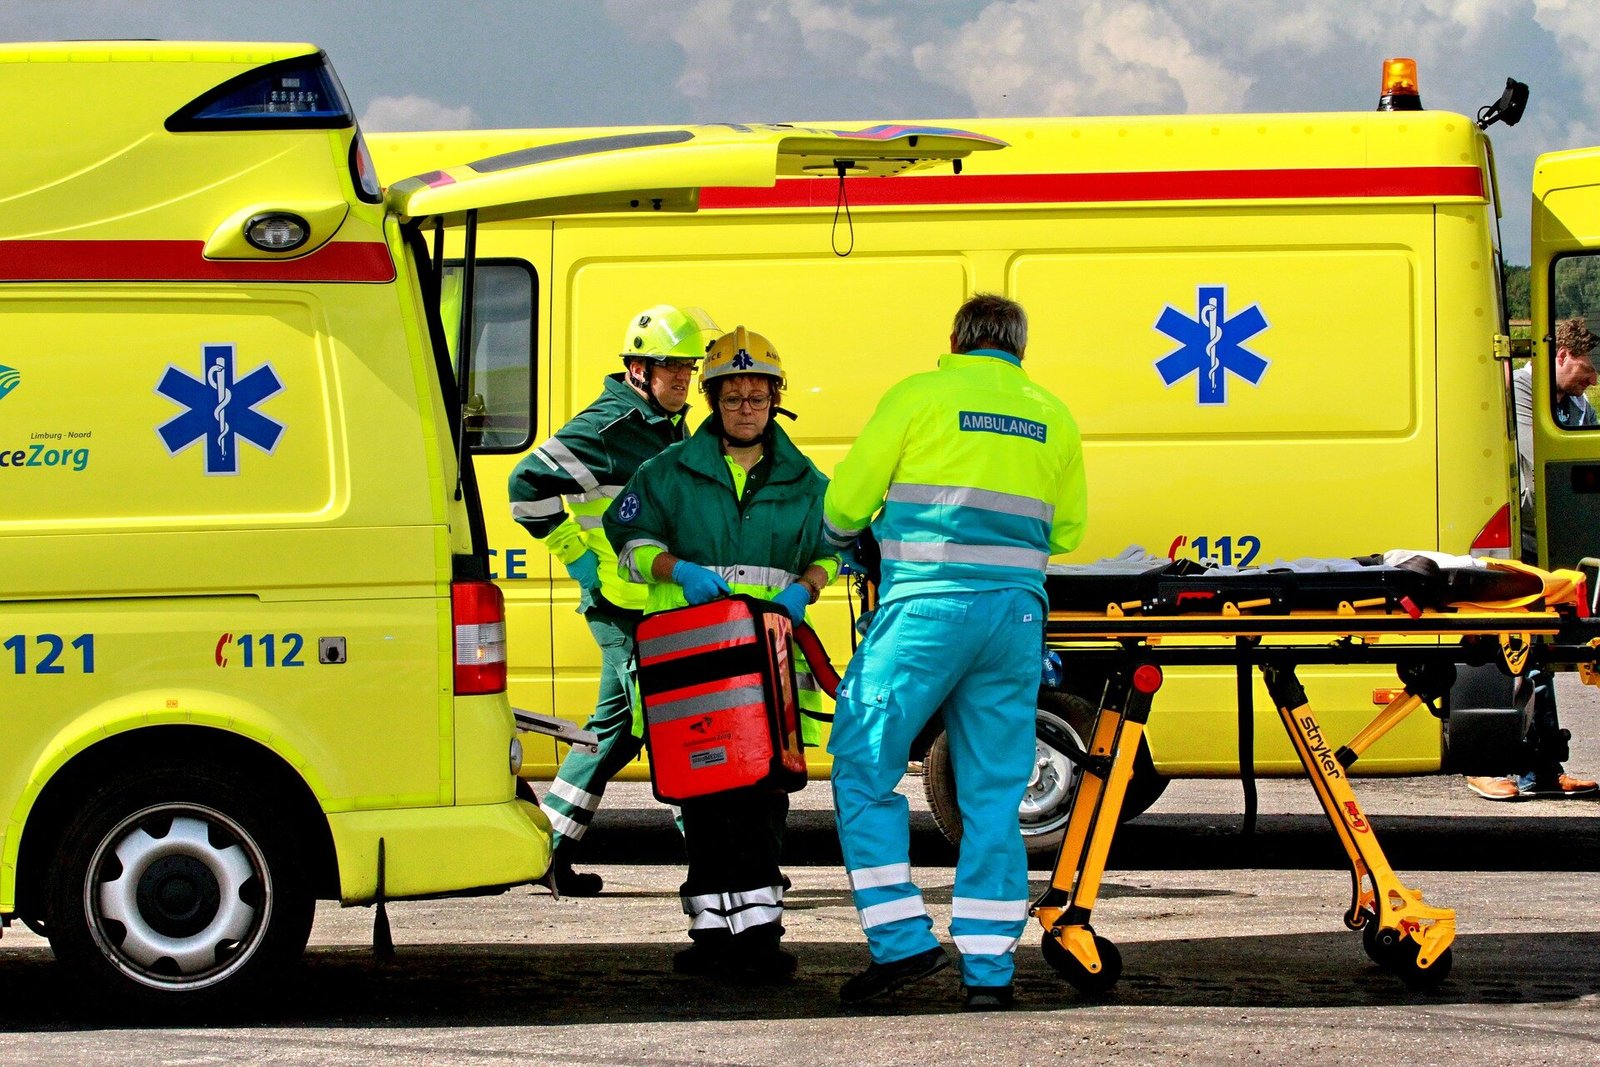 Research shows more lives can be saved if ambulance staff receive AI support